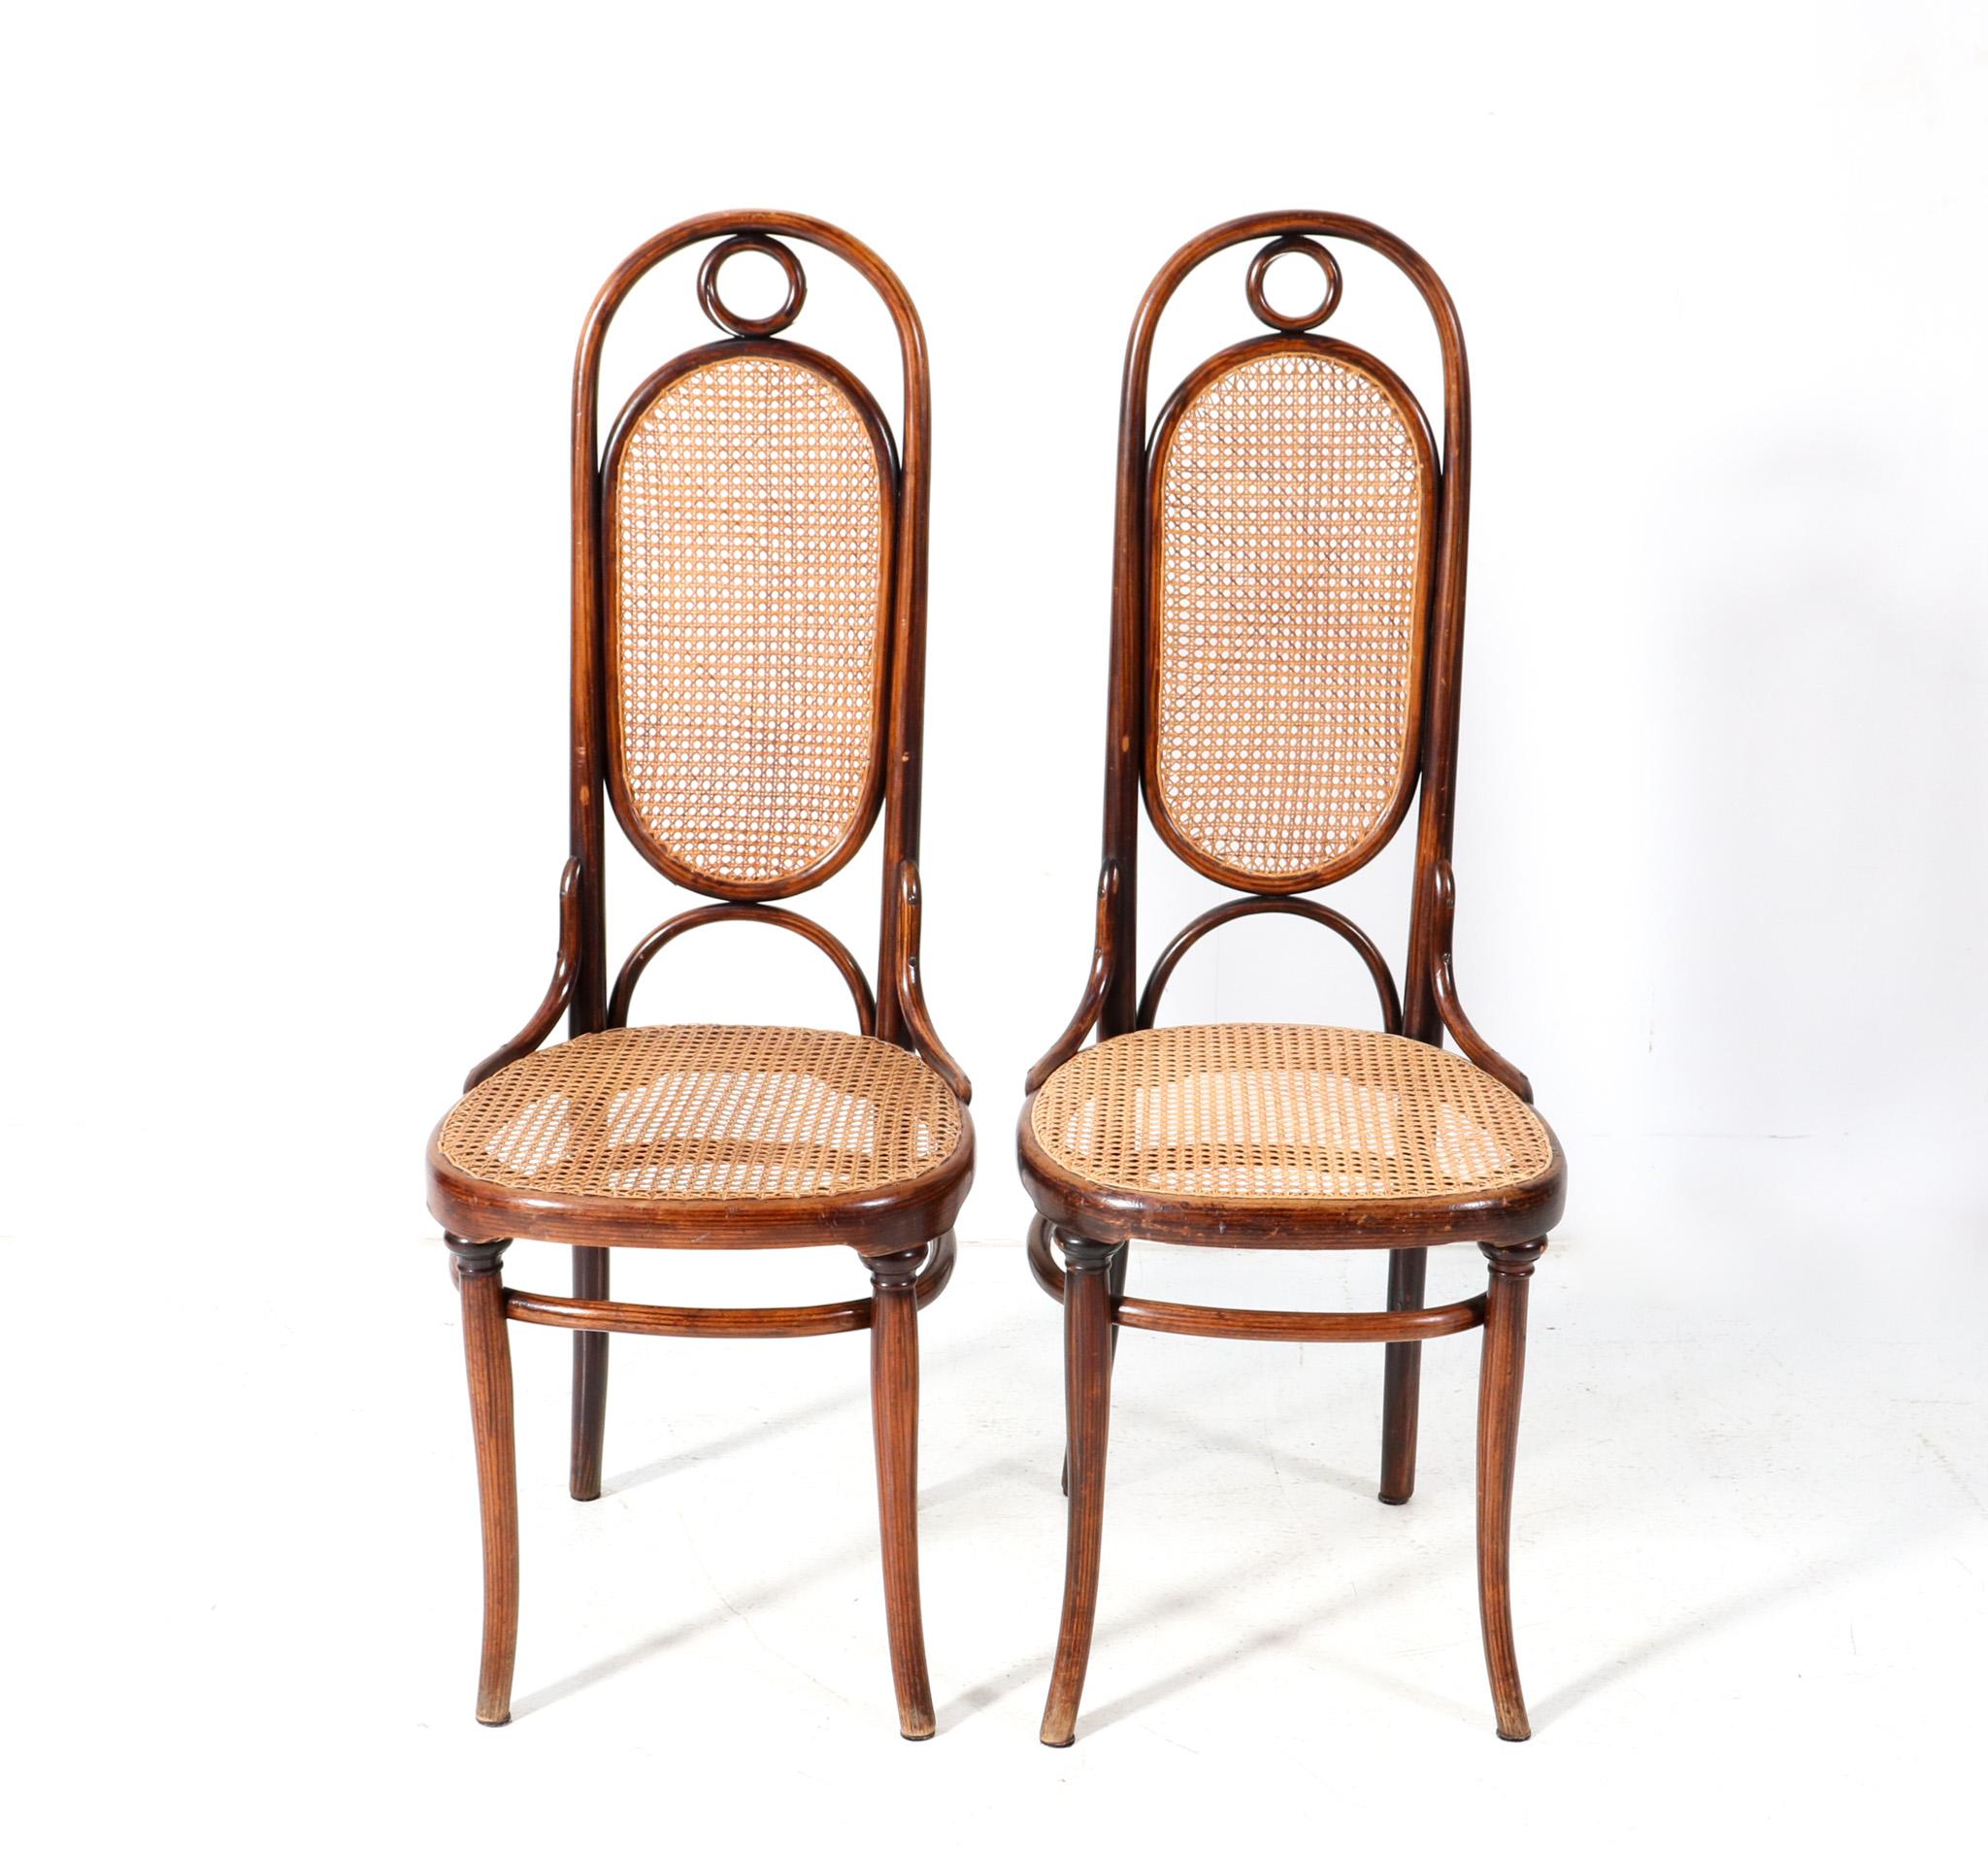 Late 19th Century Pair of Beech Art Nouveau High Back Chairs Model 17 by Michael Thonet, 1890s For Sale